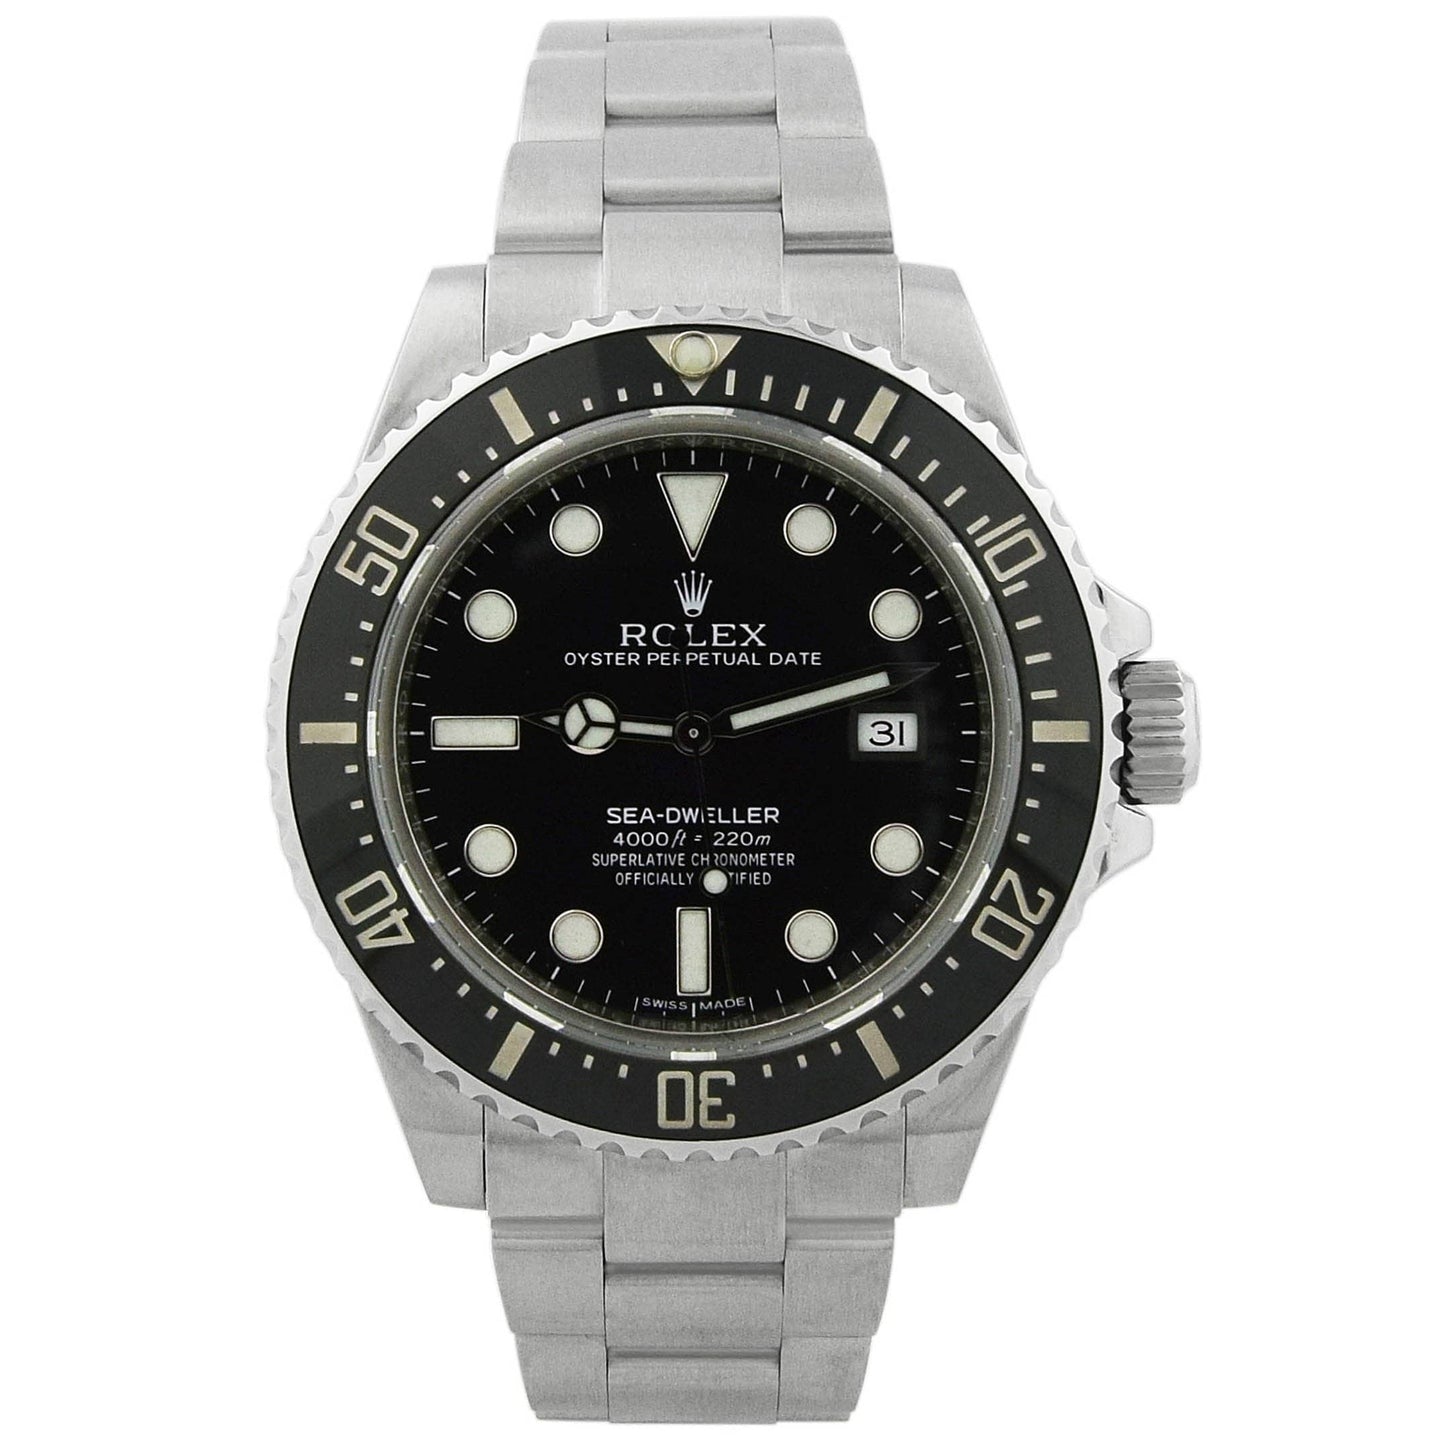 Rolex Sea-Dweller 4000 Stainless Steel 40mm Black Dot Dial Watch Reference# 116600